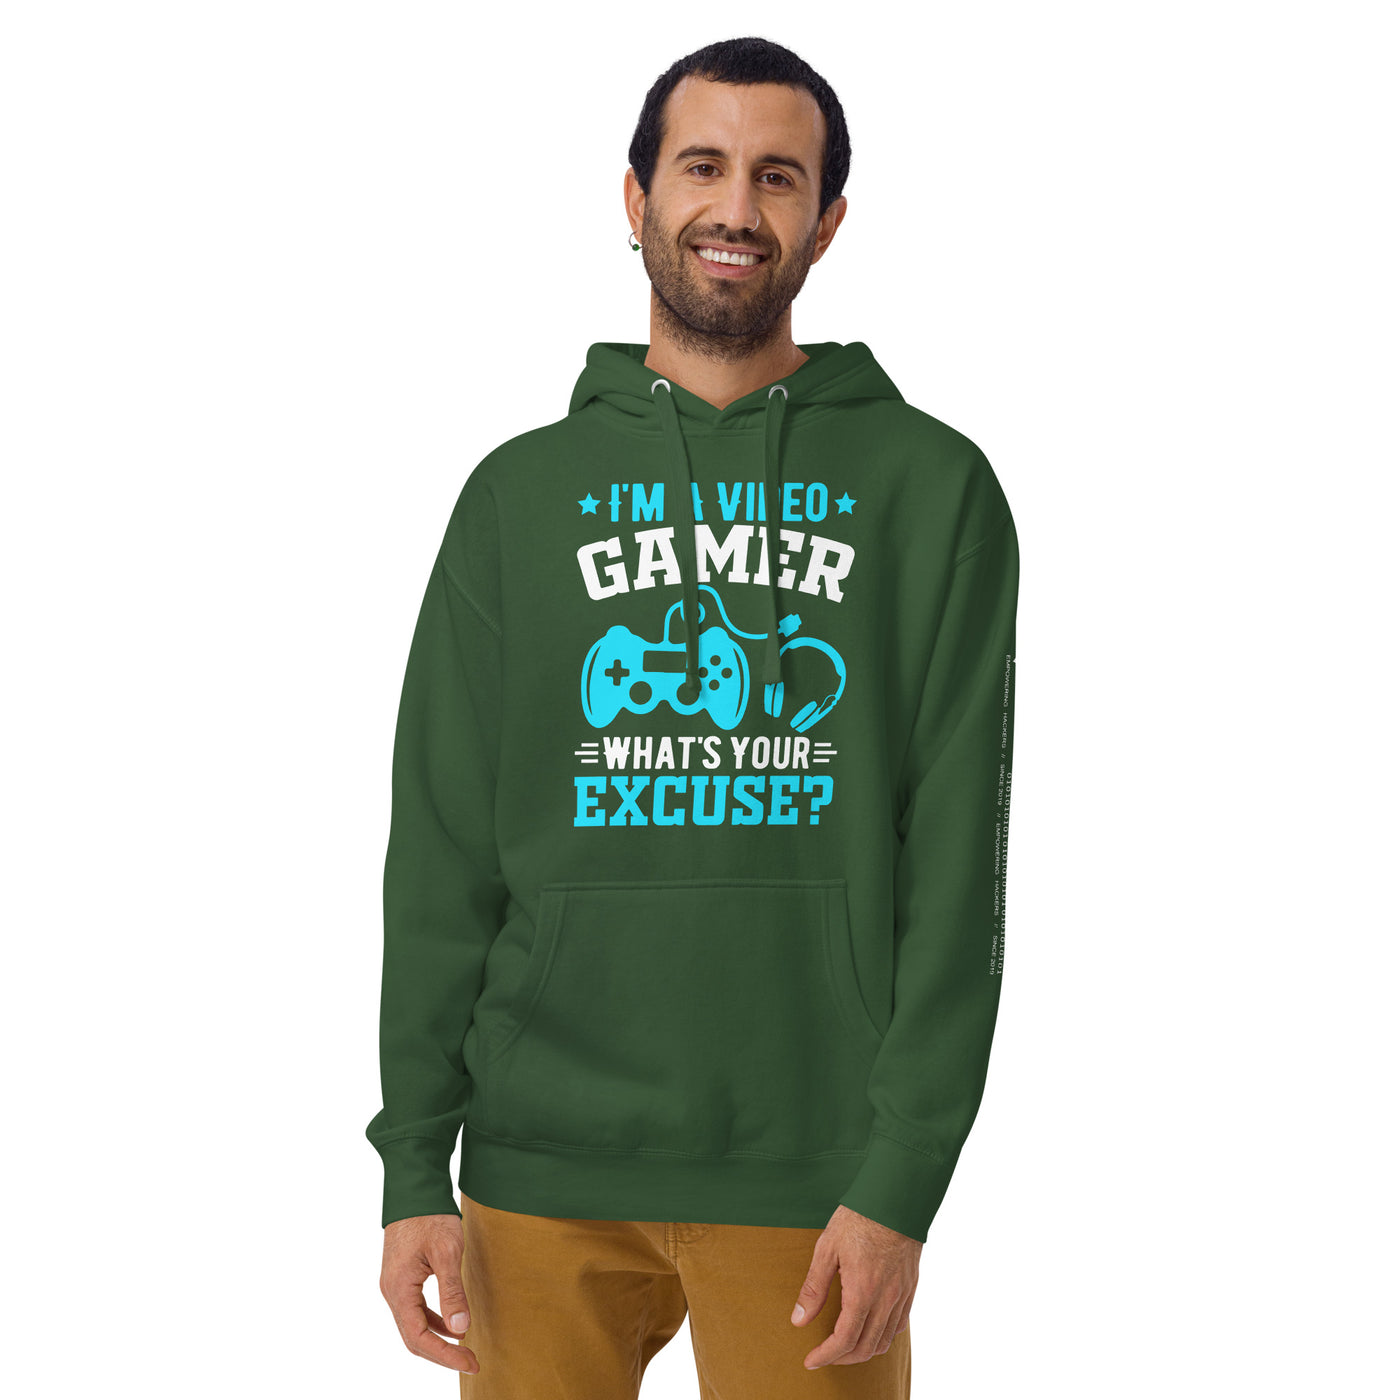 I am a Video Gamer! What is Your Excuse? Unisex Hoodie